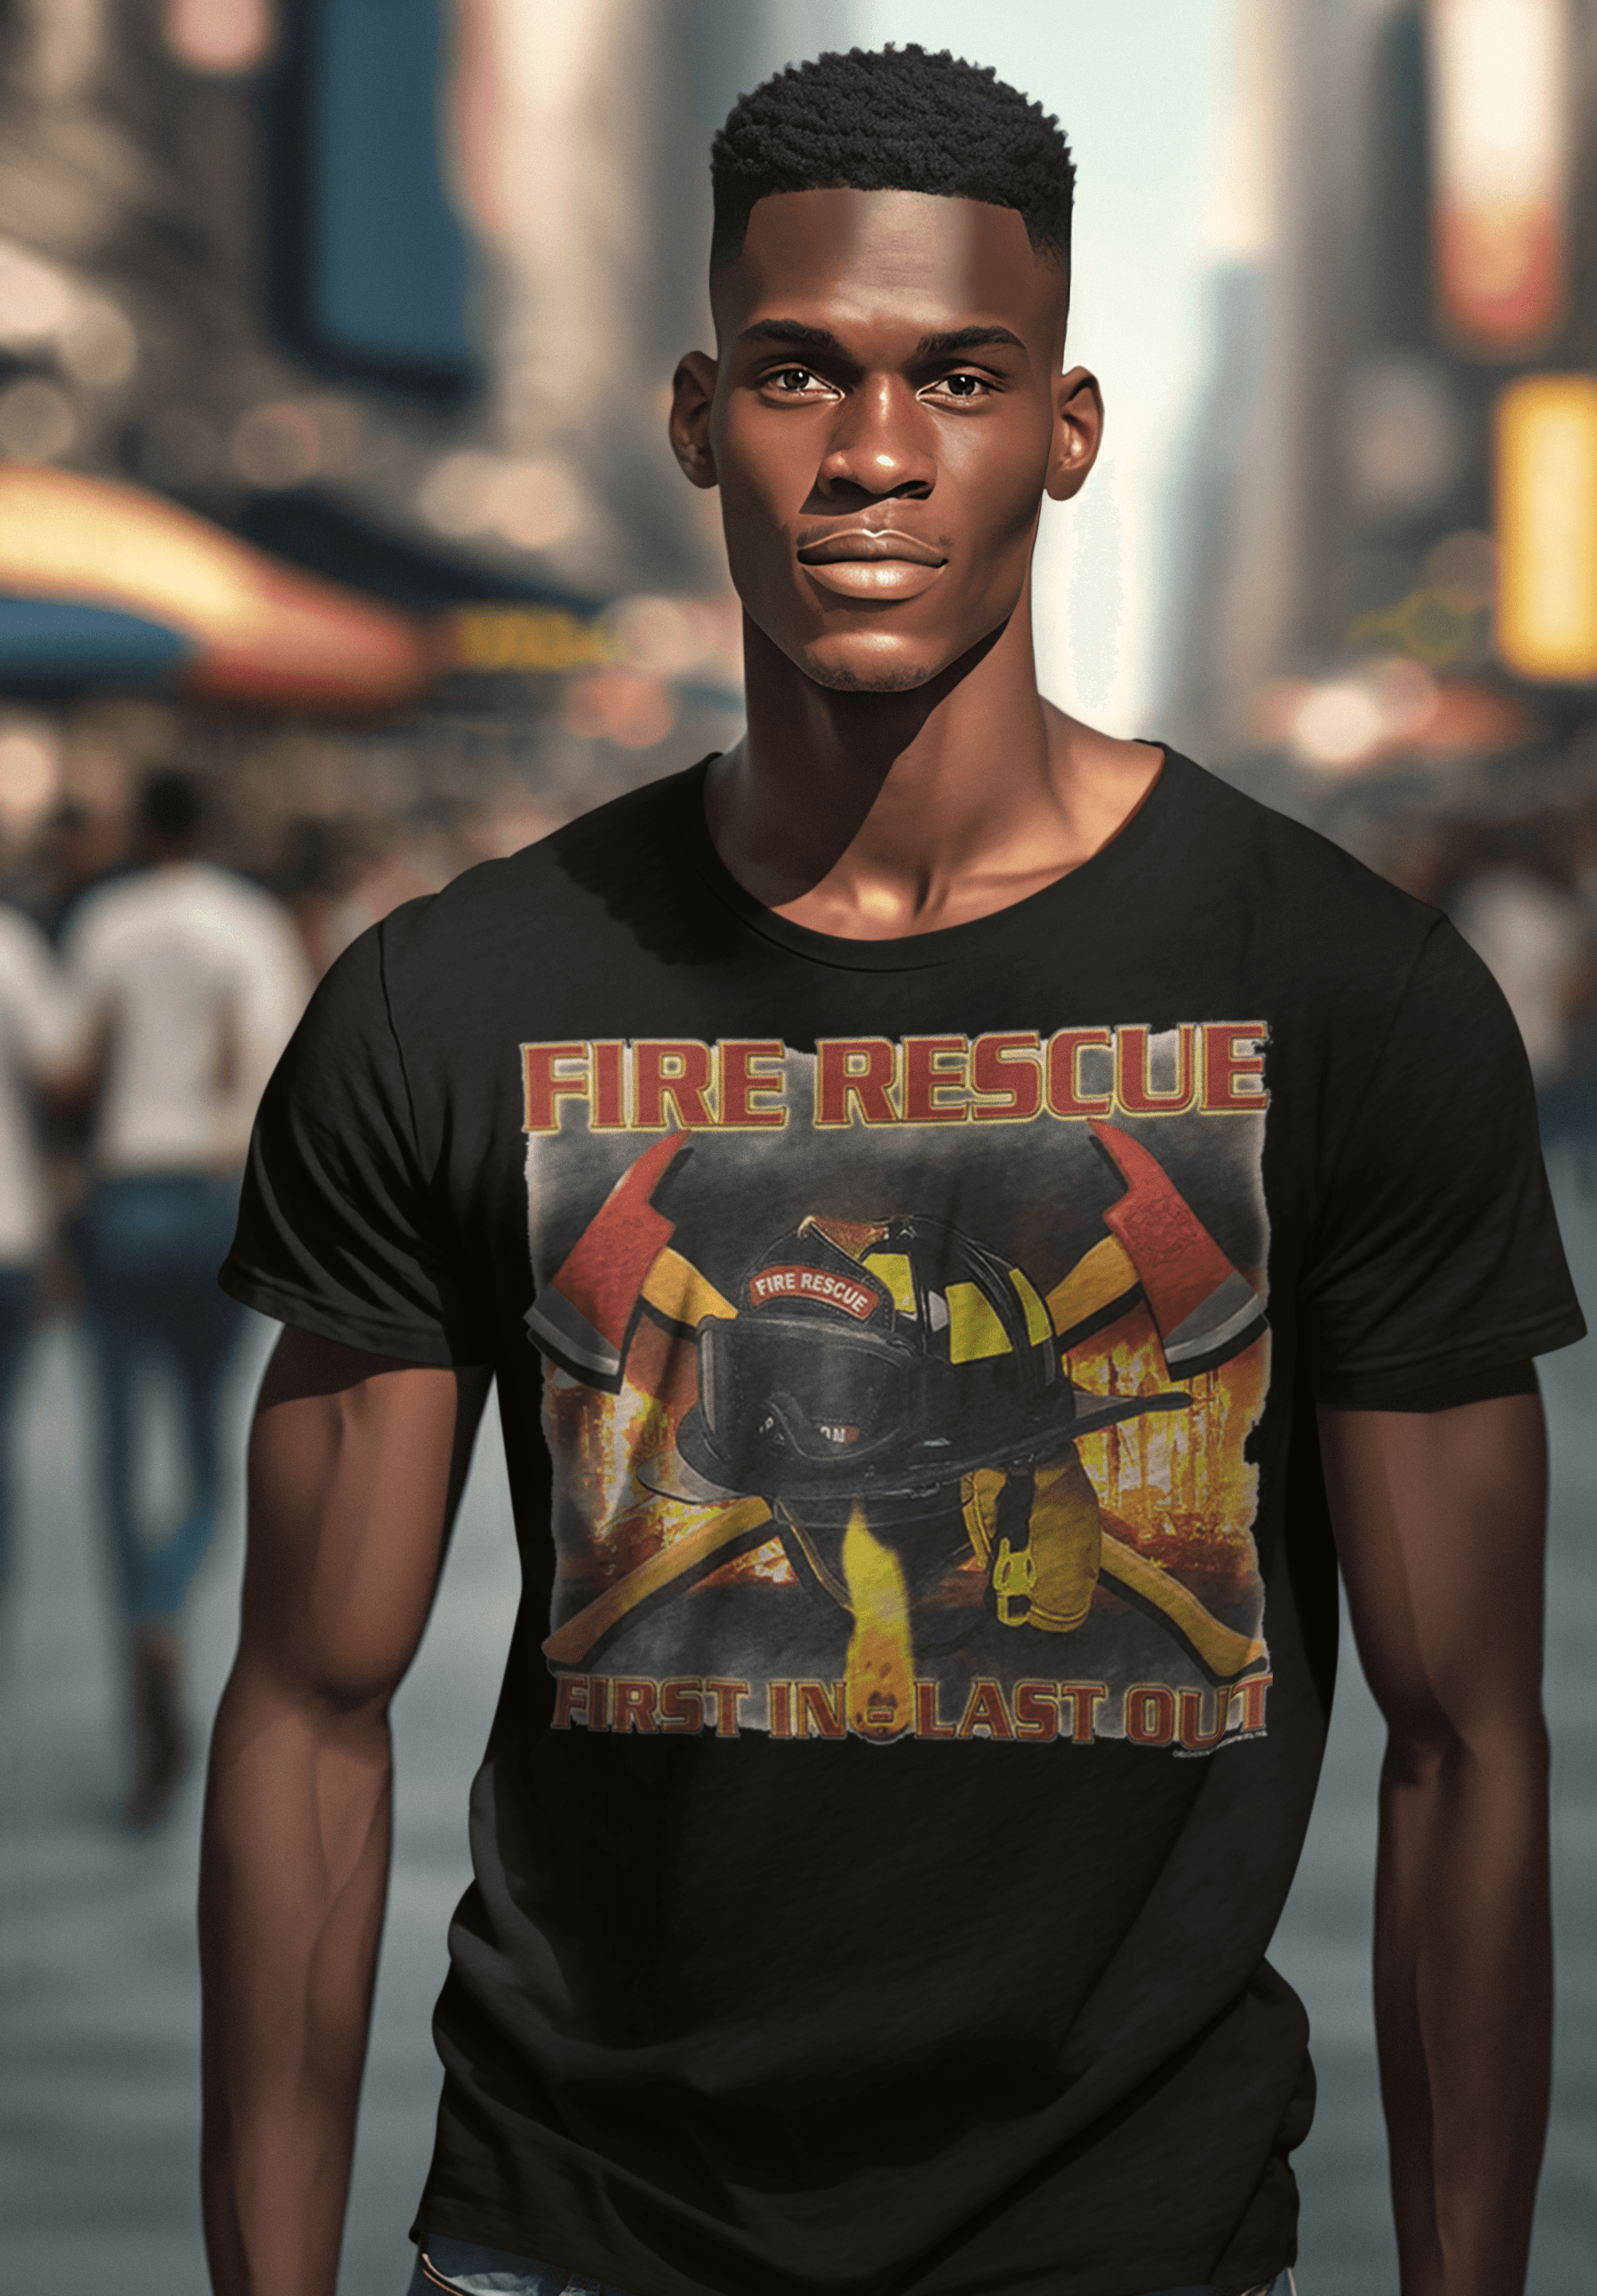 Fire Rescue T-shirt First in Last Out First Responder Short Sleeve Unisex Top